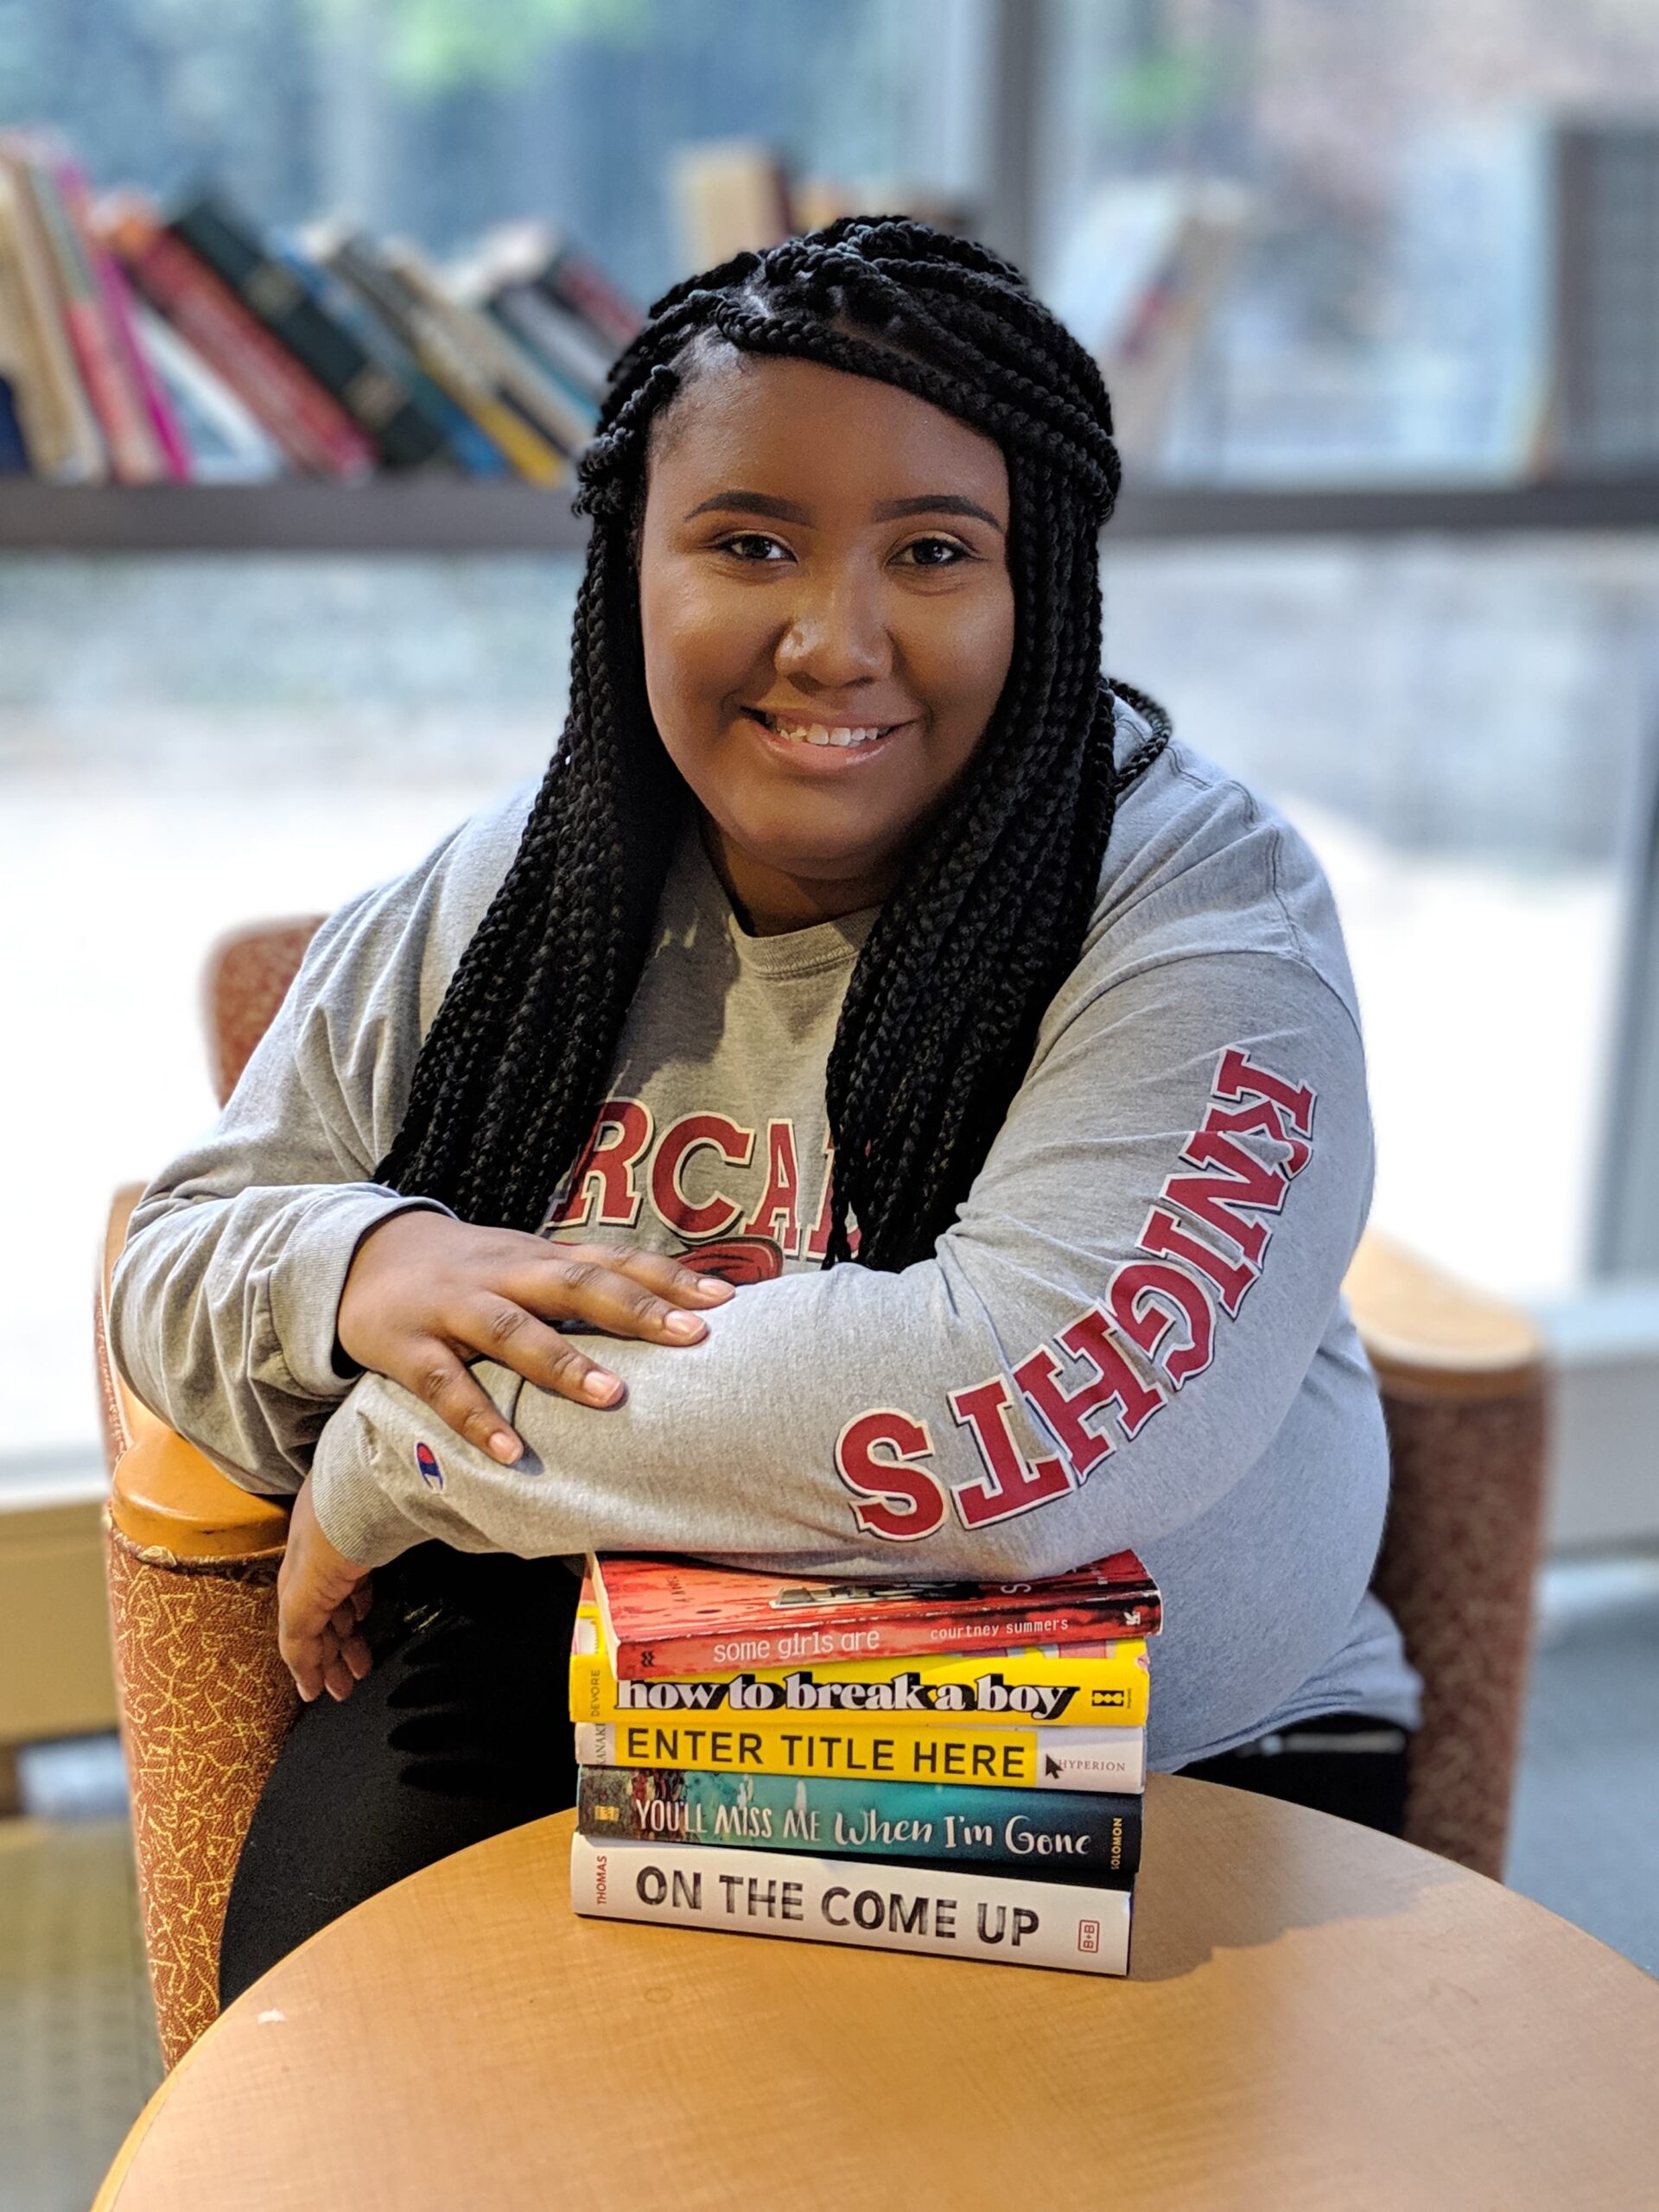 headshot of Sierra Elmore, a Black woman with long hair, smiling and sitting at a table next to a pile of books